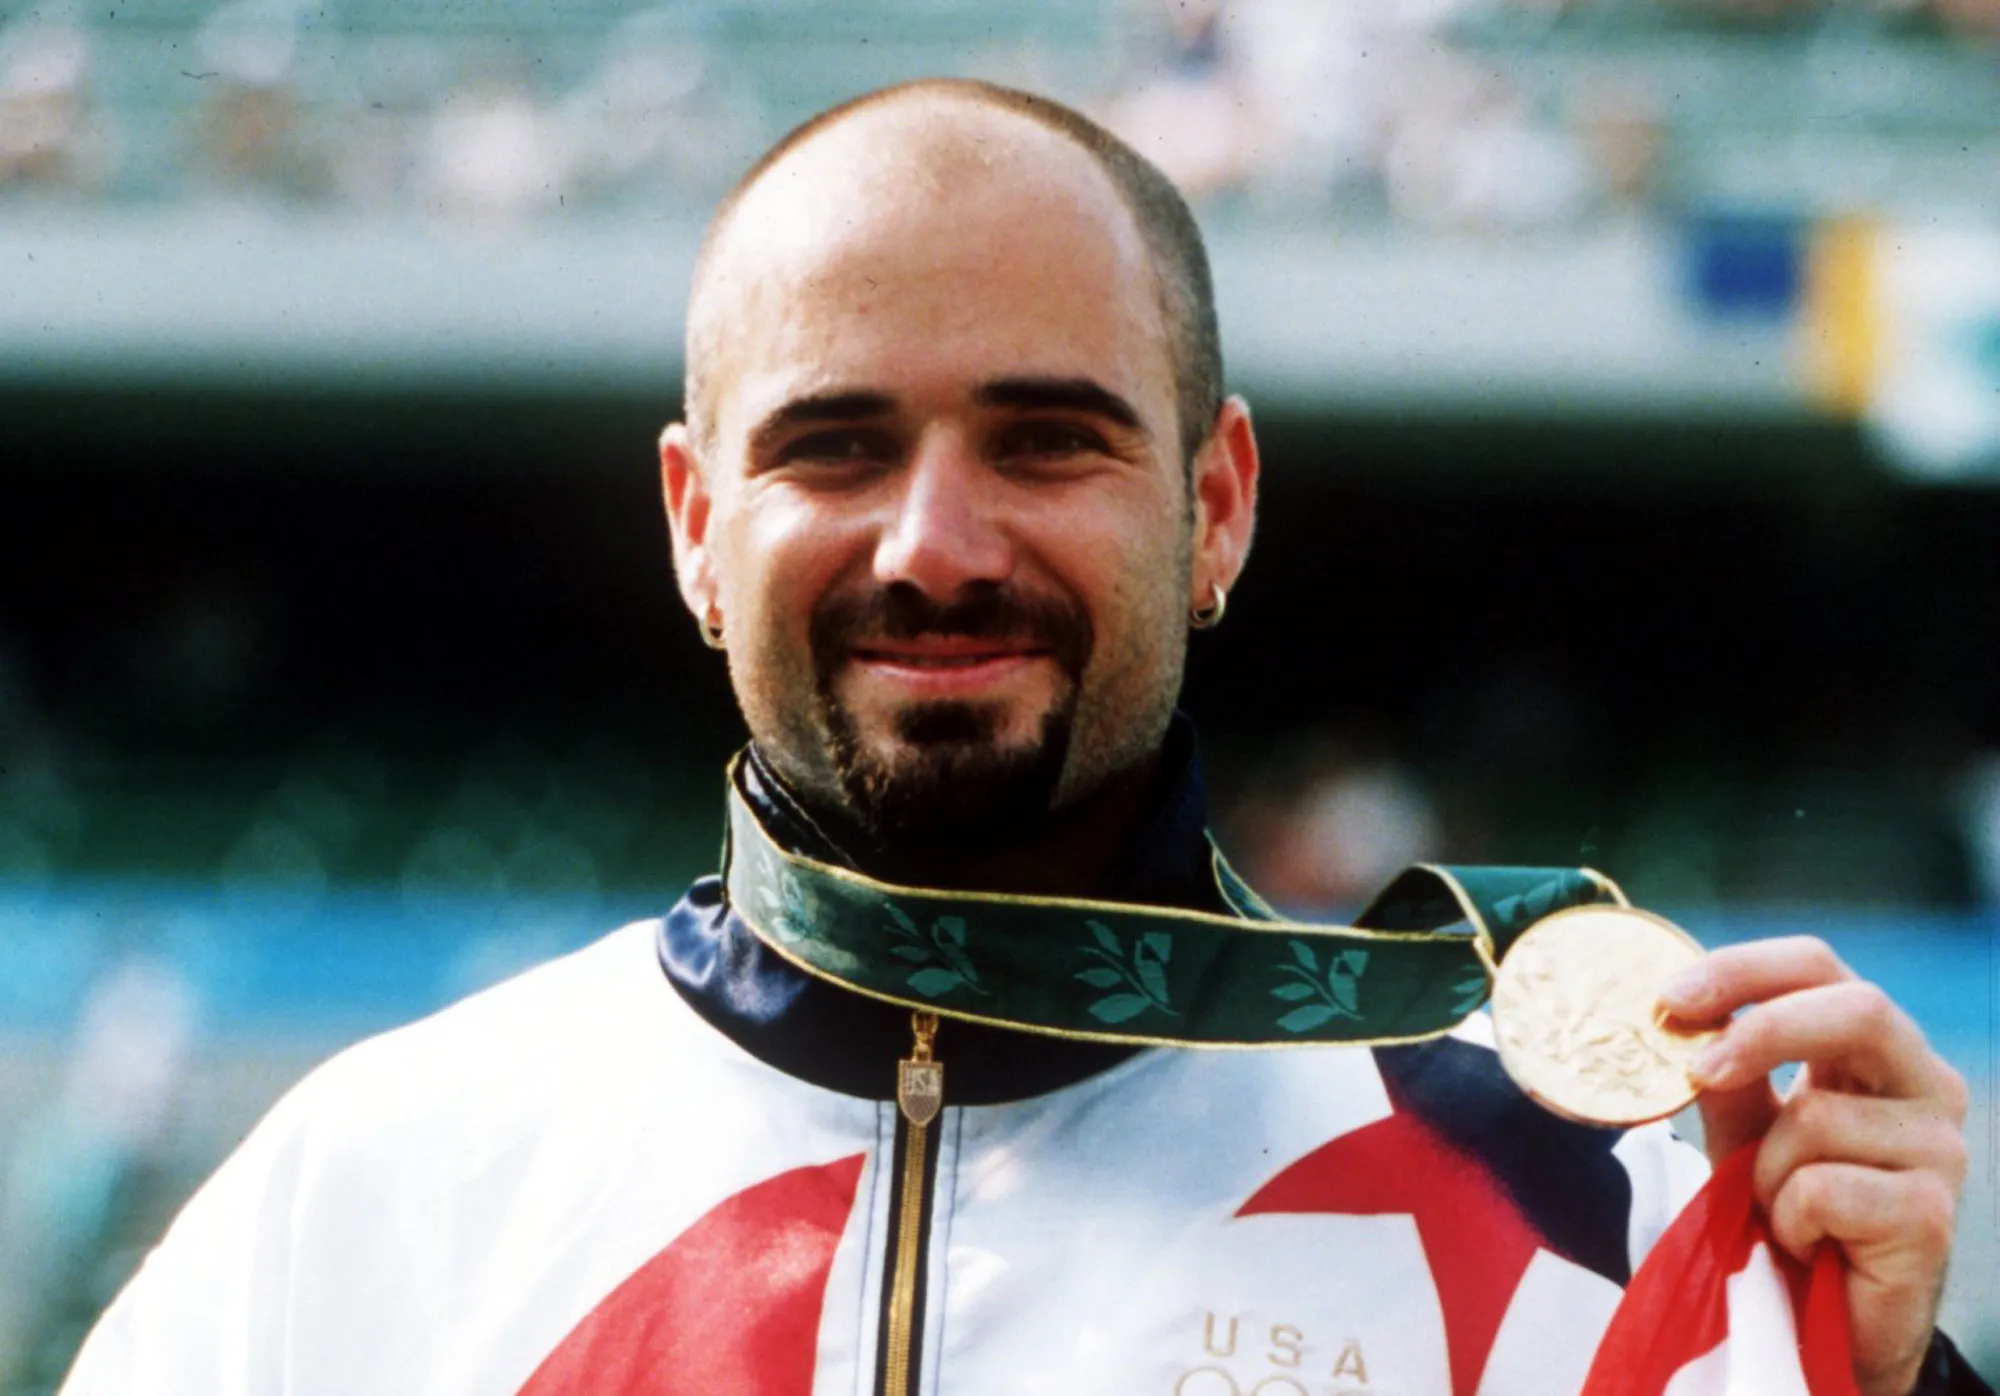 Most Olympic medals in Tennis history